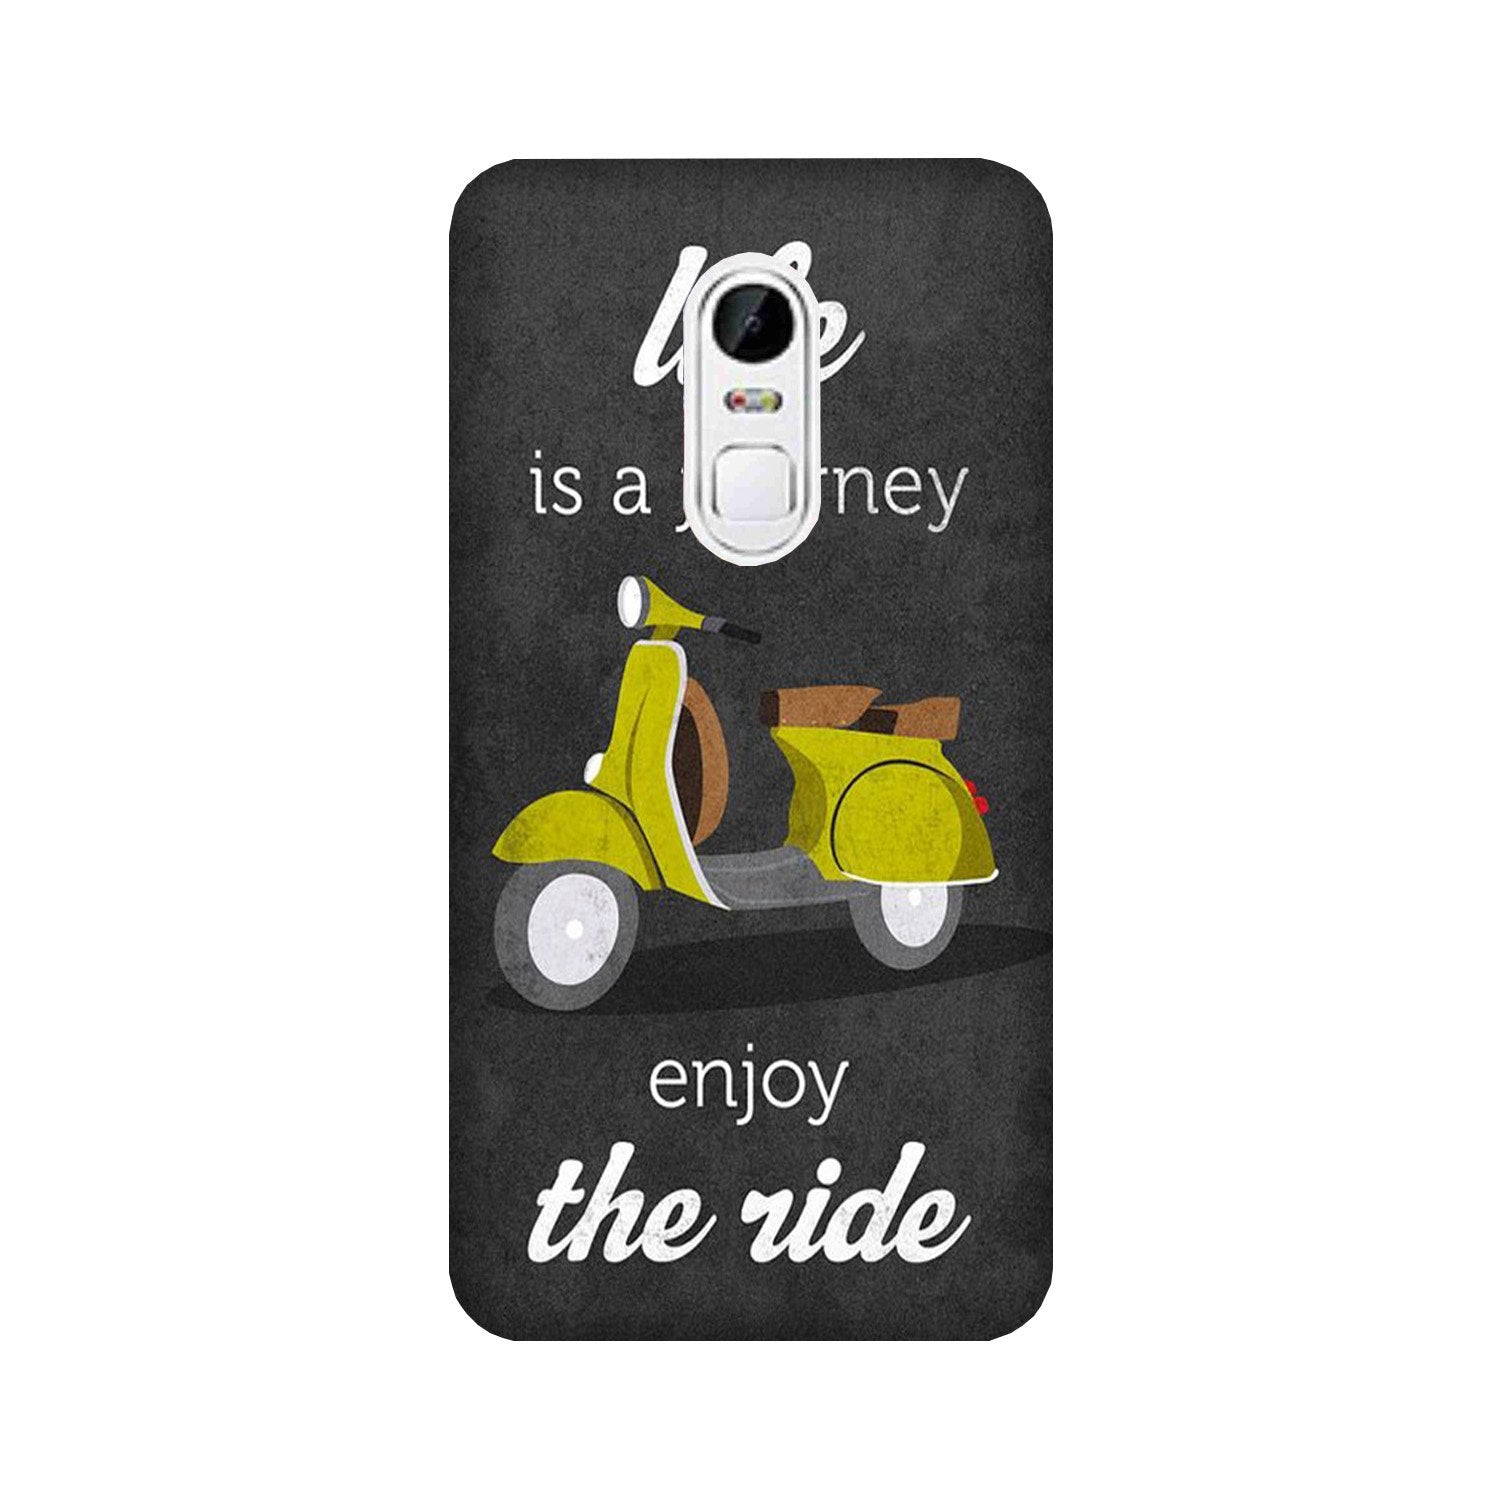 Life is a Journey Case for Lenovo Vibe X3 (Design No. 261)